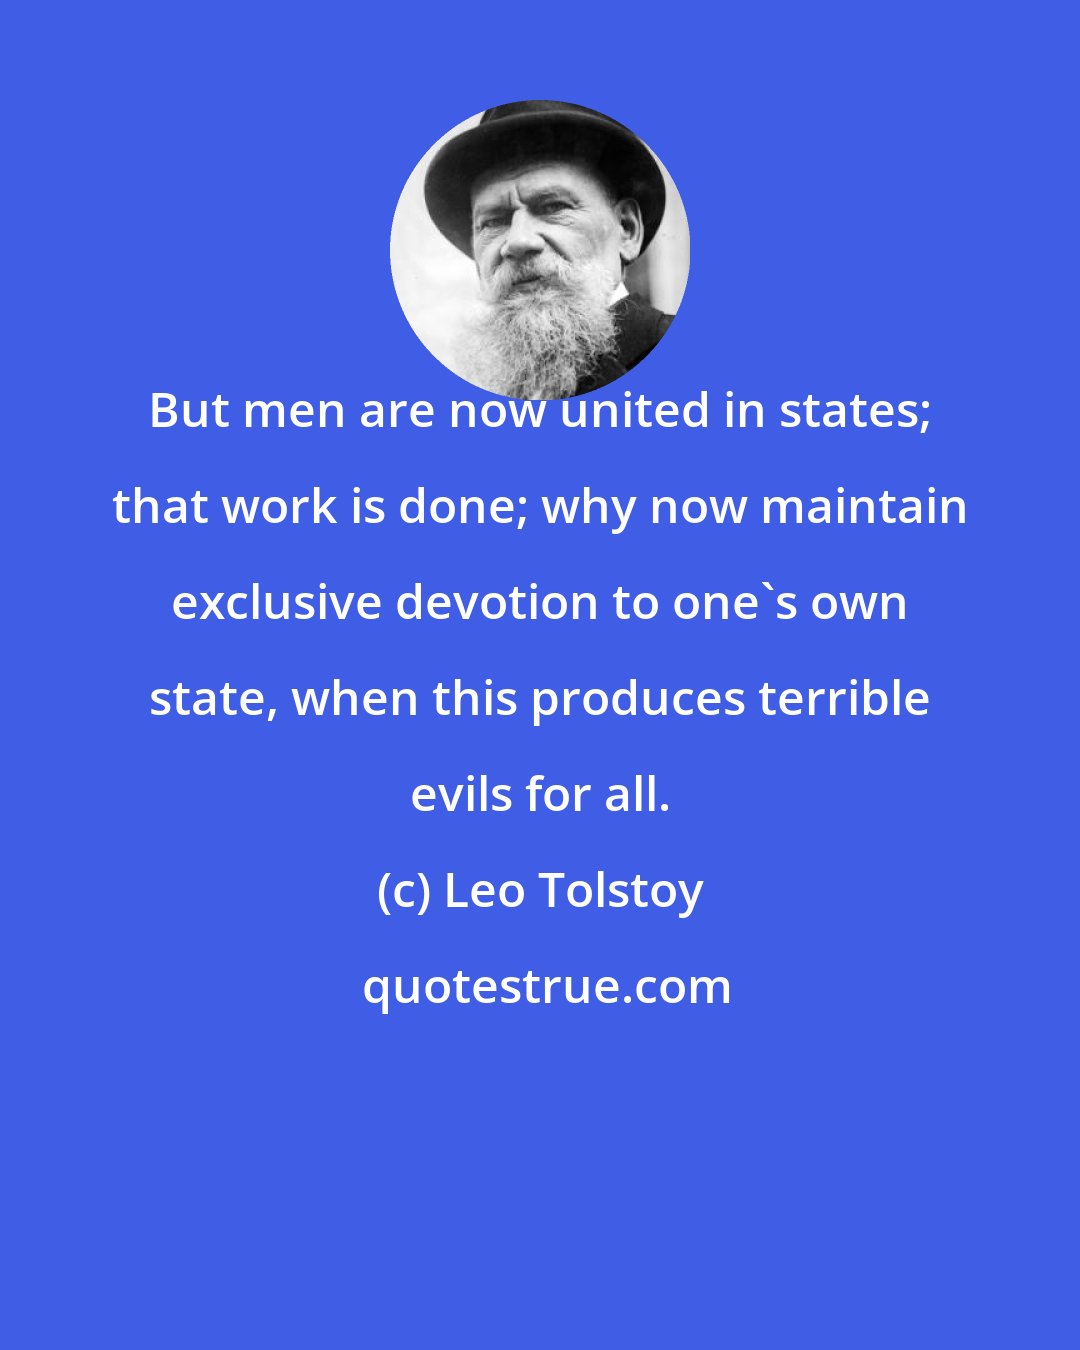 Leo Tolstoy: But men are now united in states; that work is done; why now maintain exclusive devotion to one's own state, when this produces terrible evils for all.